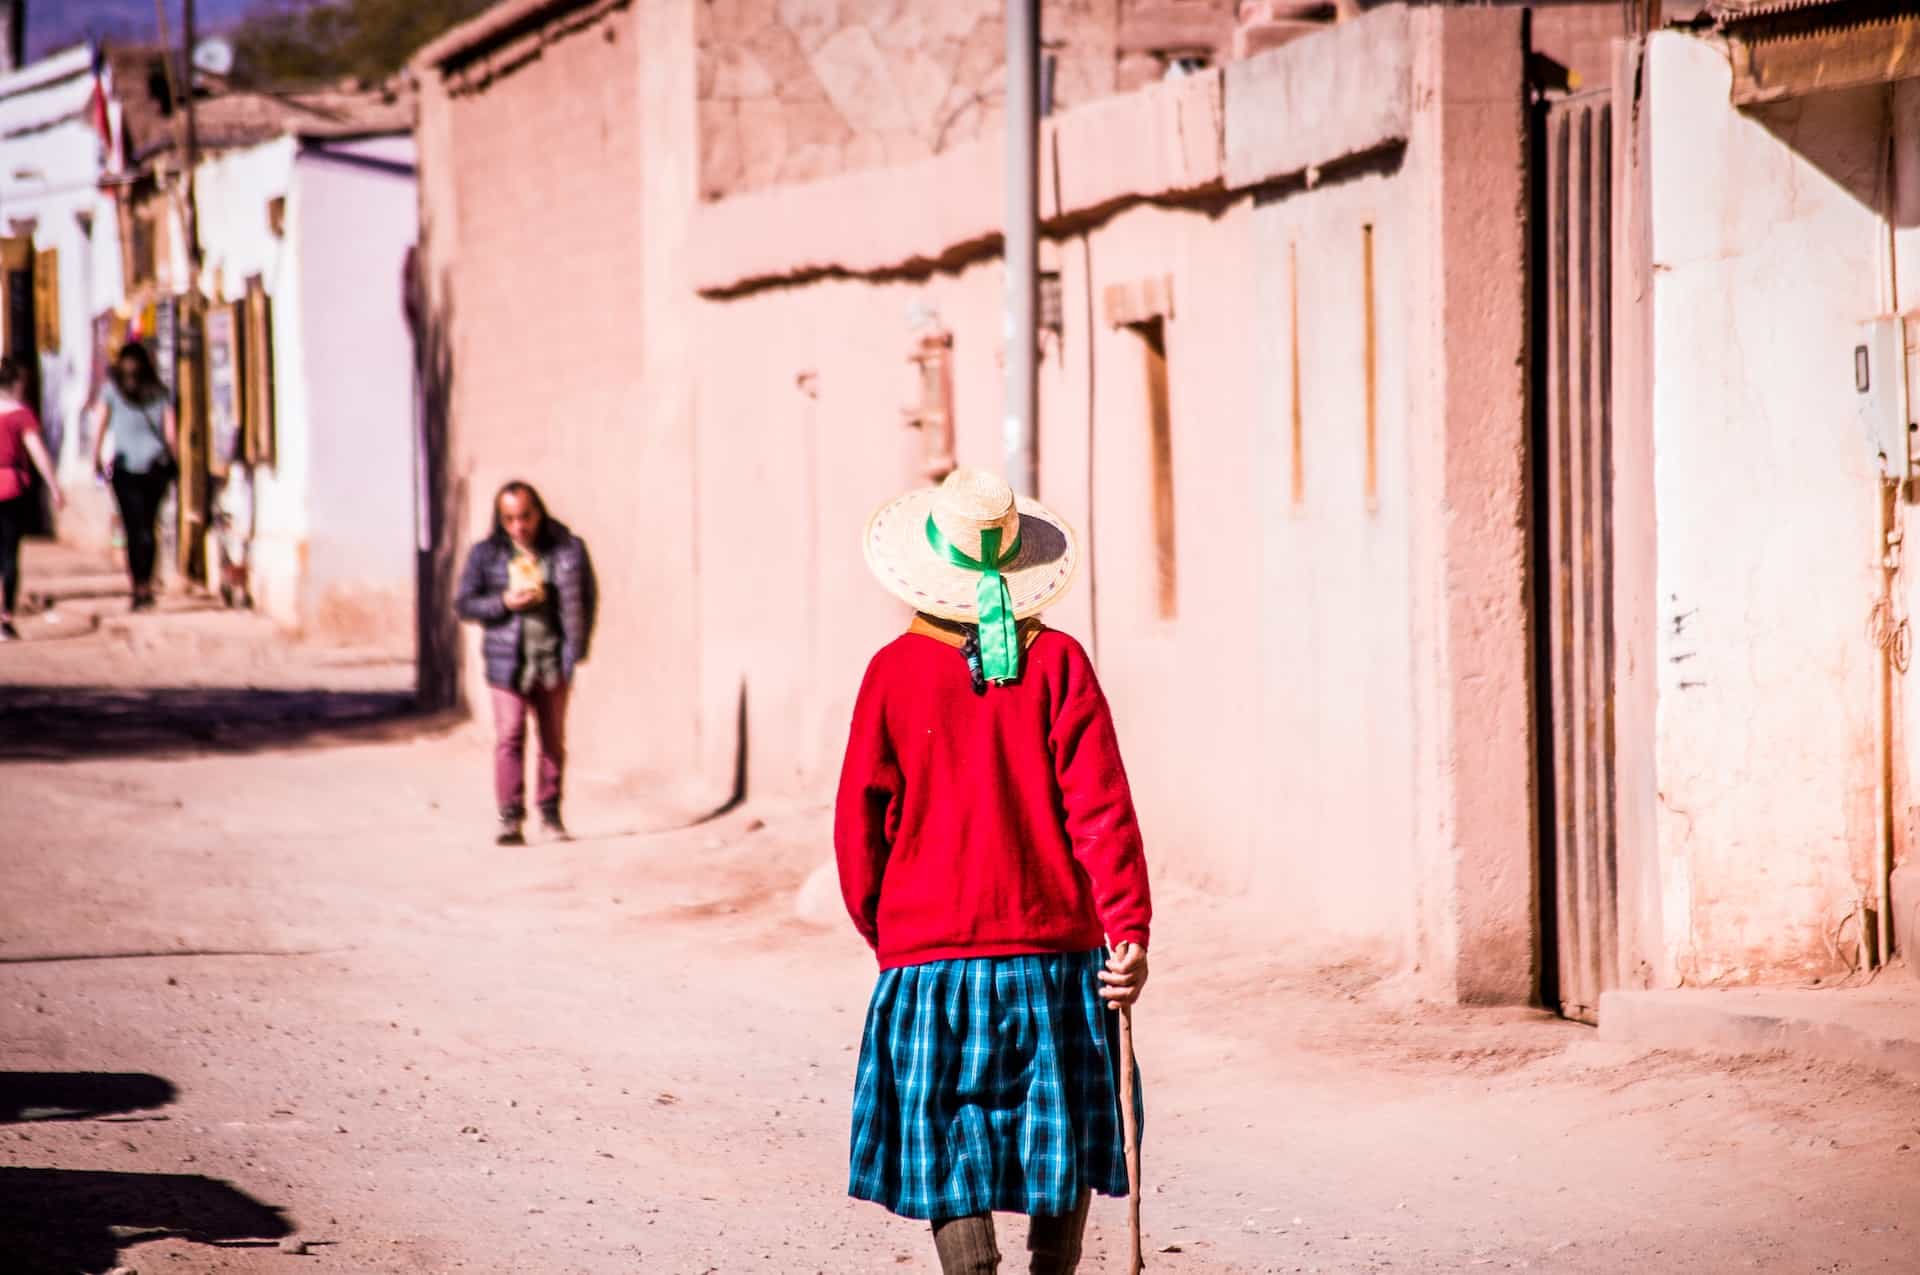 A woman walking with a cane, a hat and a red sweater in San Pedro de Atacama, Chile.